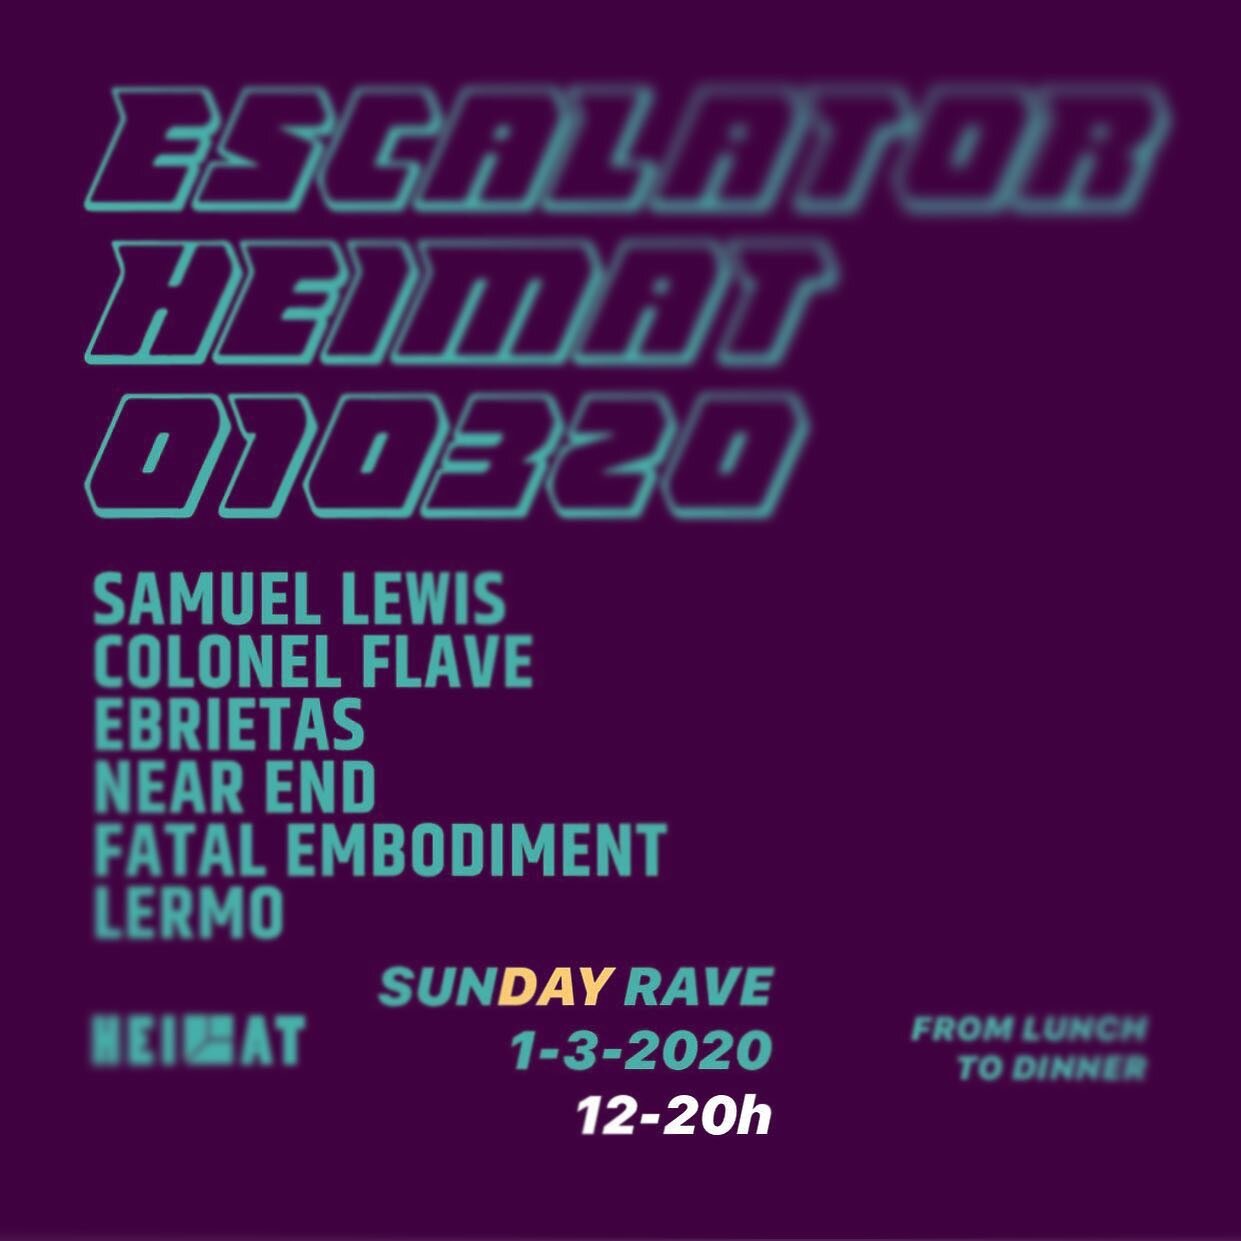 ESCALATOR - SUN DAY RAVE 
1-3-2020 // 12-20h
(from lunch to dinner)

#Techno #Rave #Acid
at  Heimat Basel

After the successfull launch of the techno driven series, we invite for another escalator!
Carneval won't stop us, come dance as long as you de